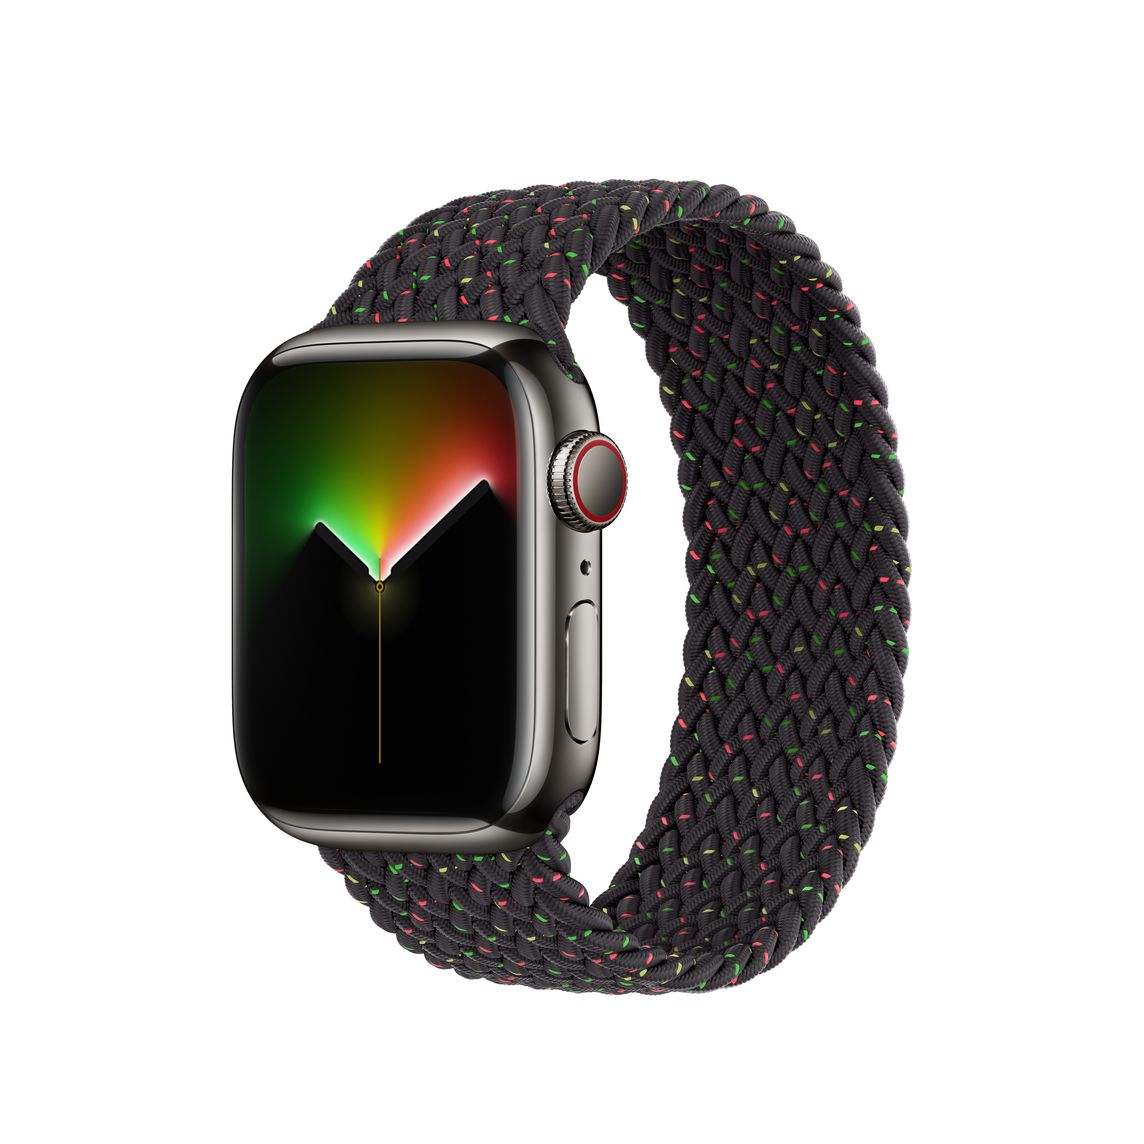 Apple Launches Special Edition Apple Watch Black Unity Braided Solo Loop and Unity Lights Watch Face